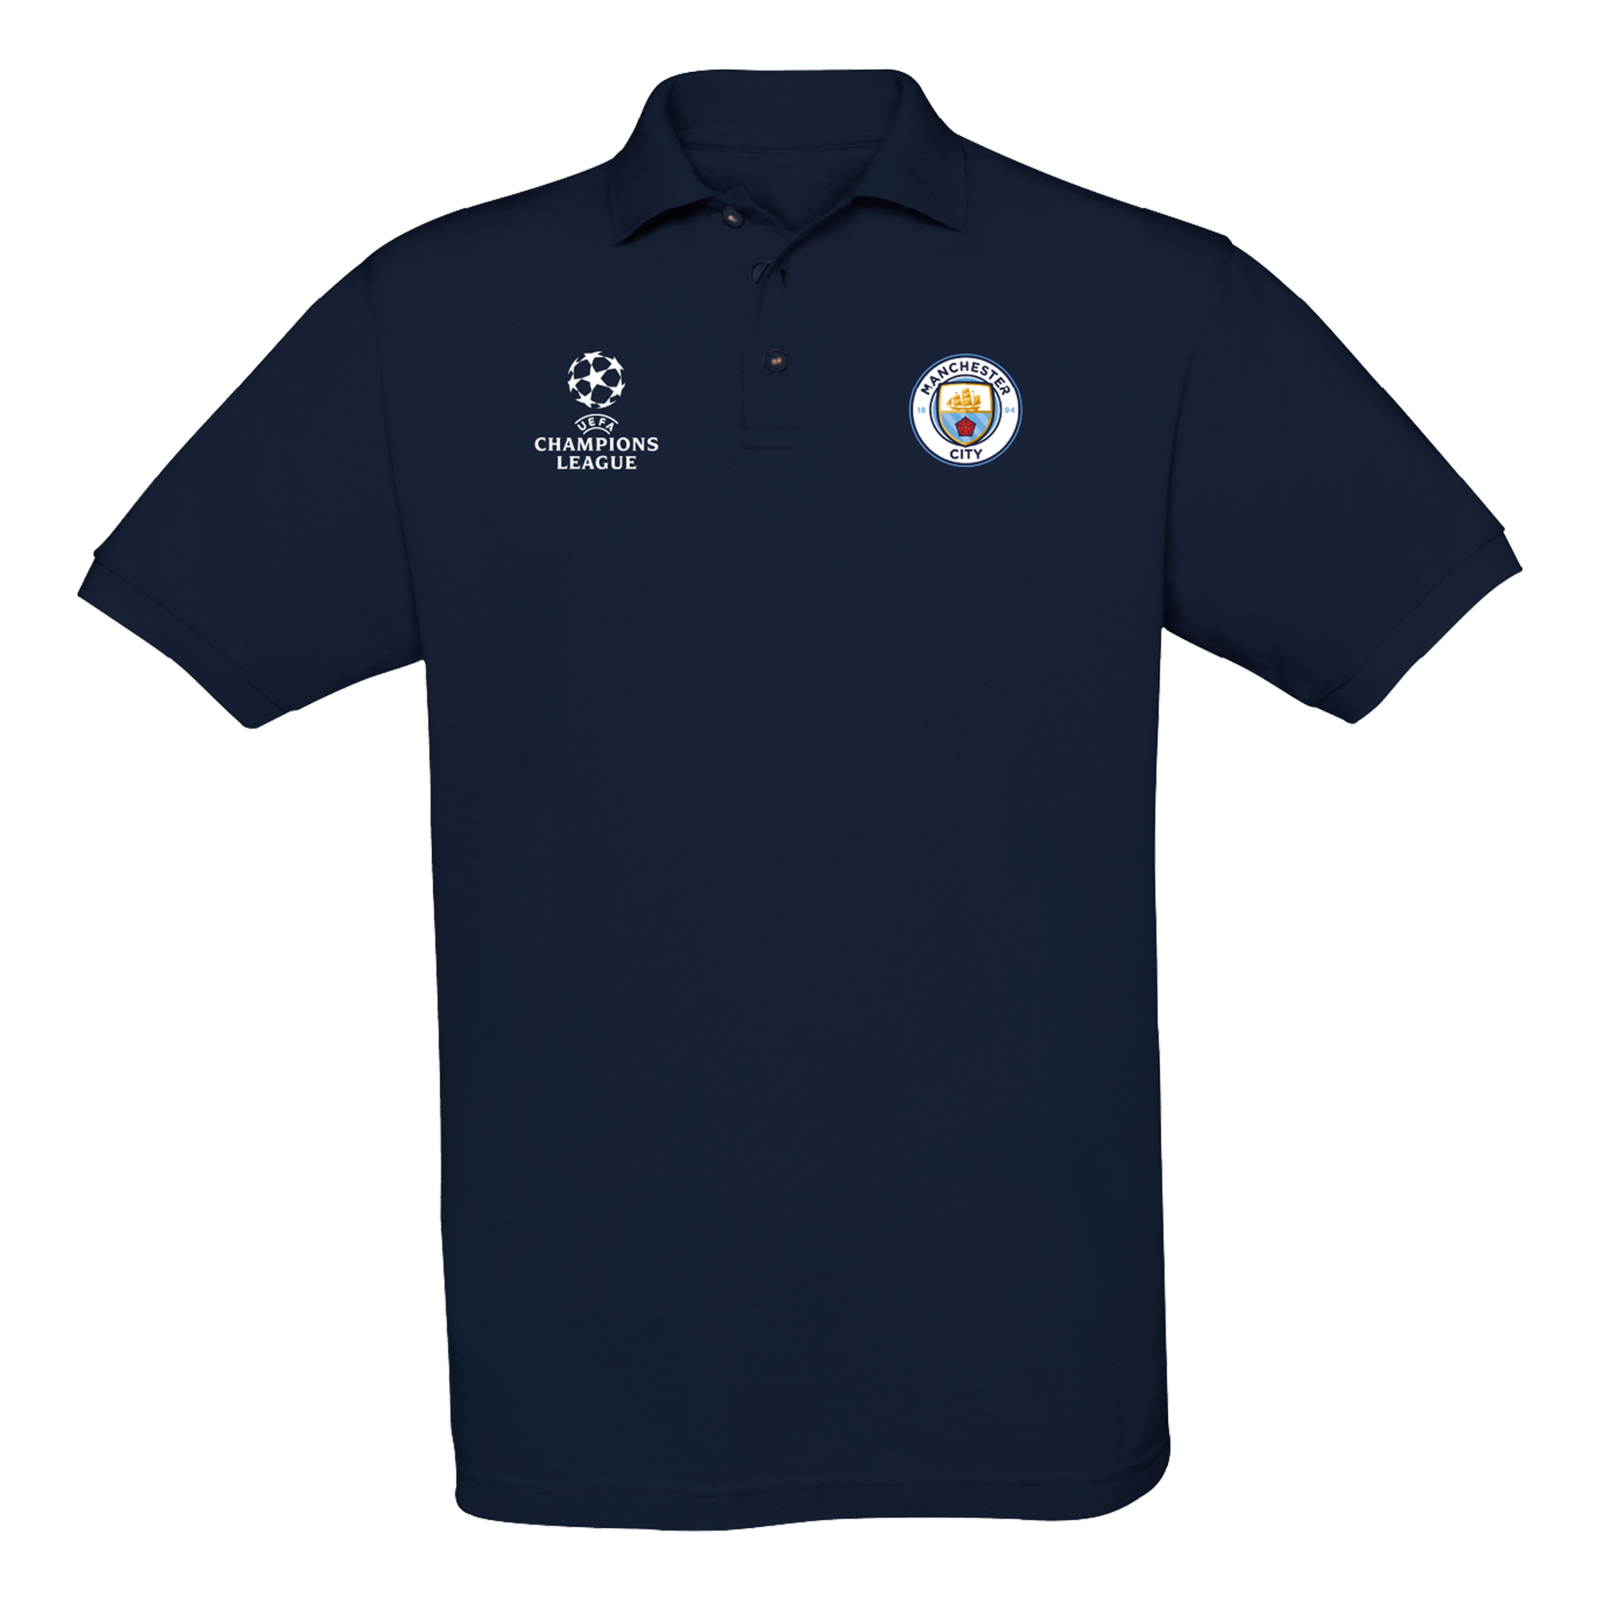 Medic Vruchtbaar Madeliefje Manchester City Champions League Polo Shirt | Official Man City Store